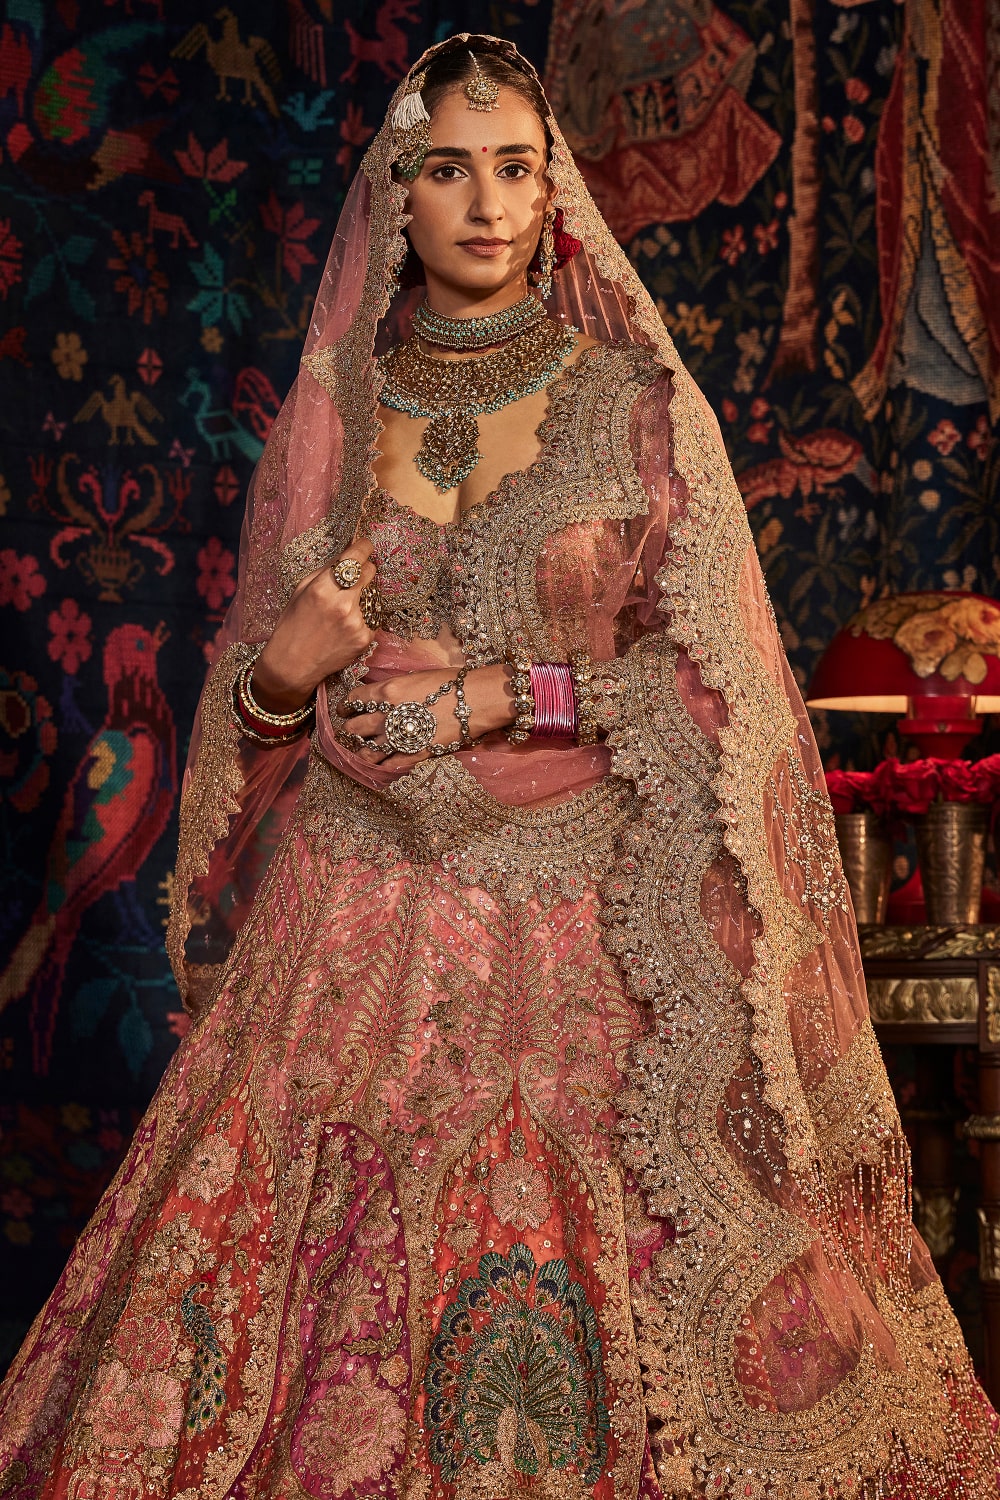 Rimple and Harpreet Narula - Mokshi's bespoke gold and ashes of rose  silk-tulle lehenga features Arabesque cartouches and floral motifs derived  from vintage textiles and Mughal inlay work, layered over a ground